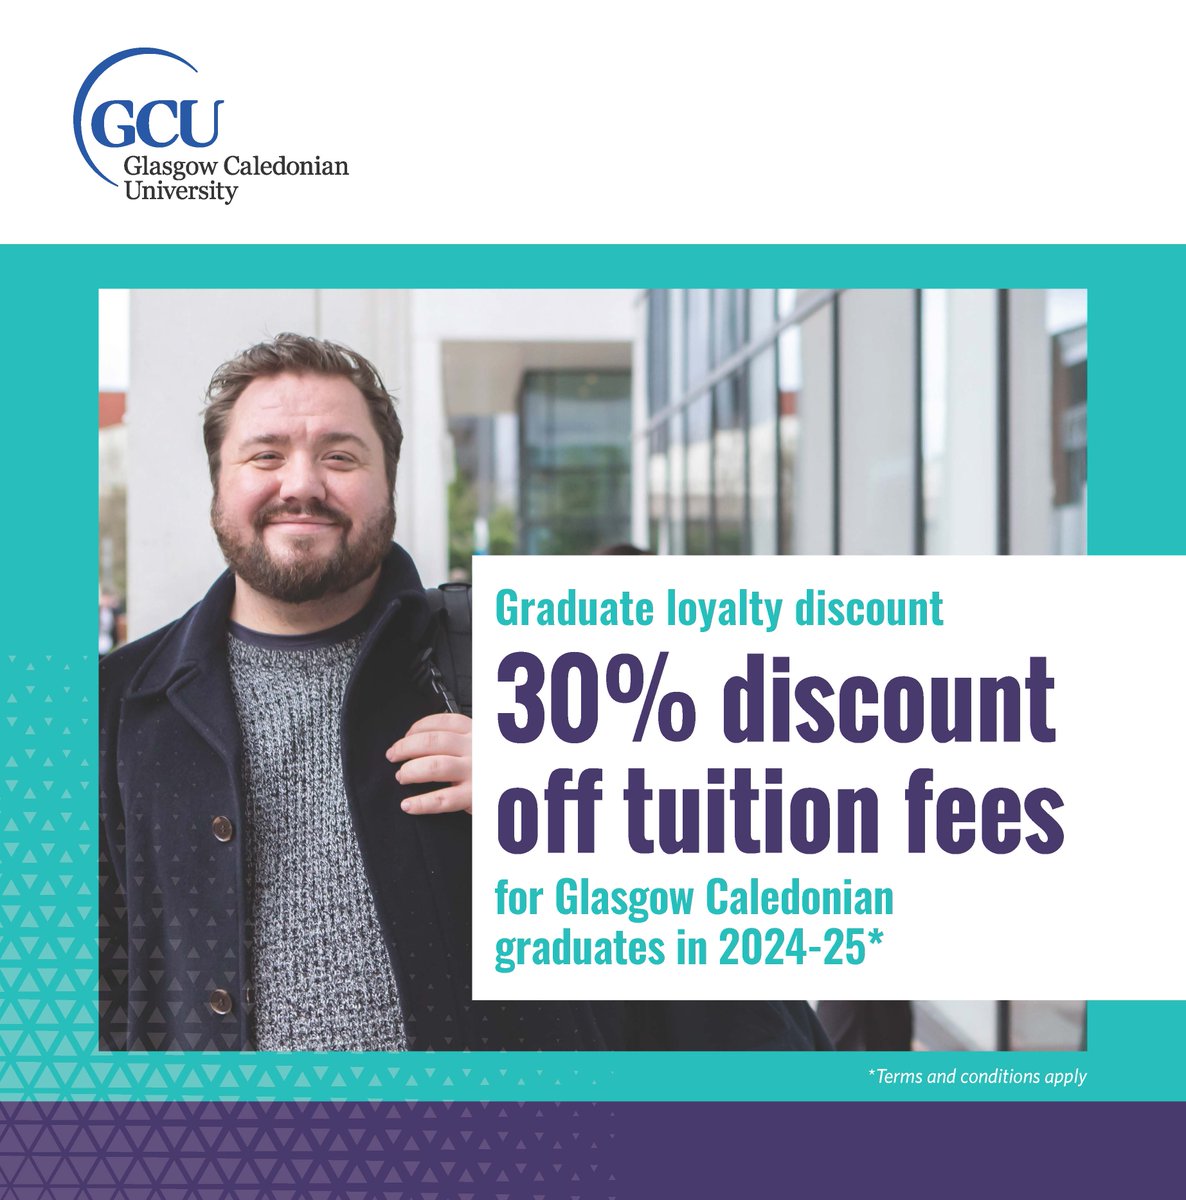 Considering postgraduate study? GCU graduates can take advantage of our graduate loyalty discount and get a 30% discount off tuition fees. 💙 Find out more here ⬇️ gcu.ac.uk/study/postgrad…